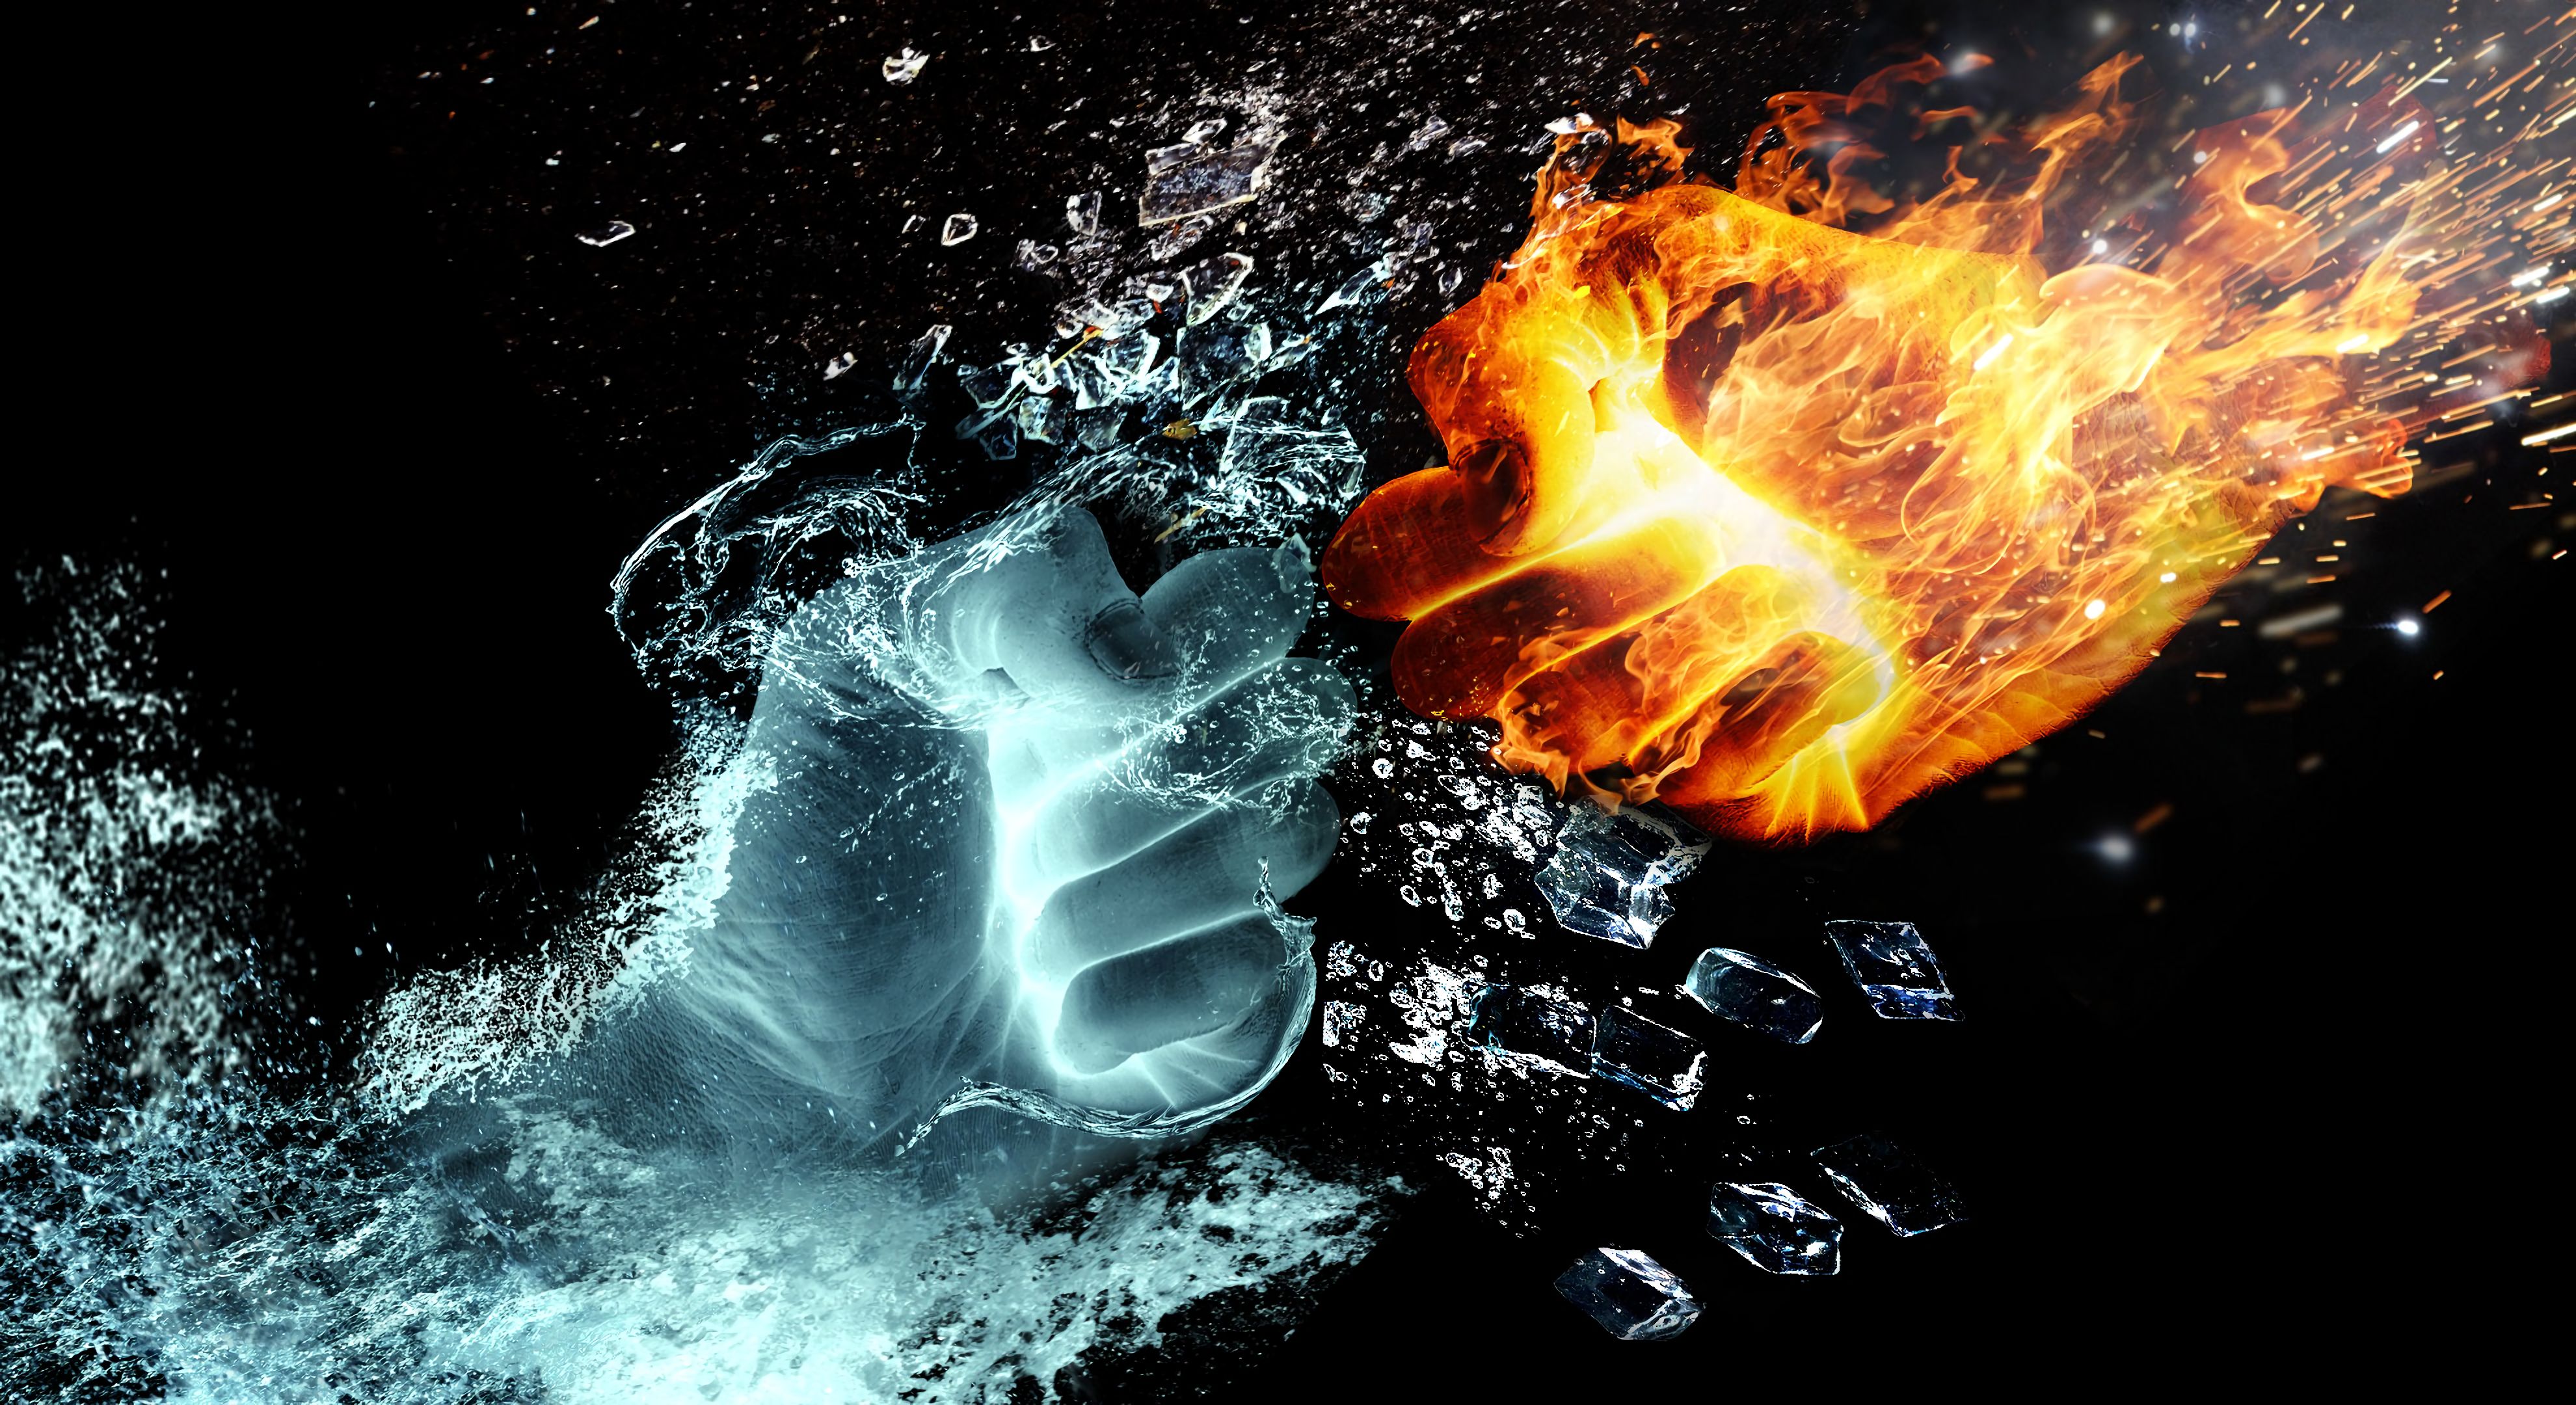 hands, fire, water, miscellanea, miscellaneous, spray, shards, smithereens images